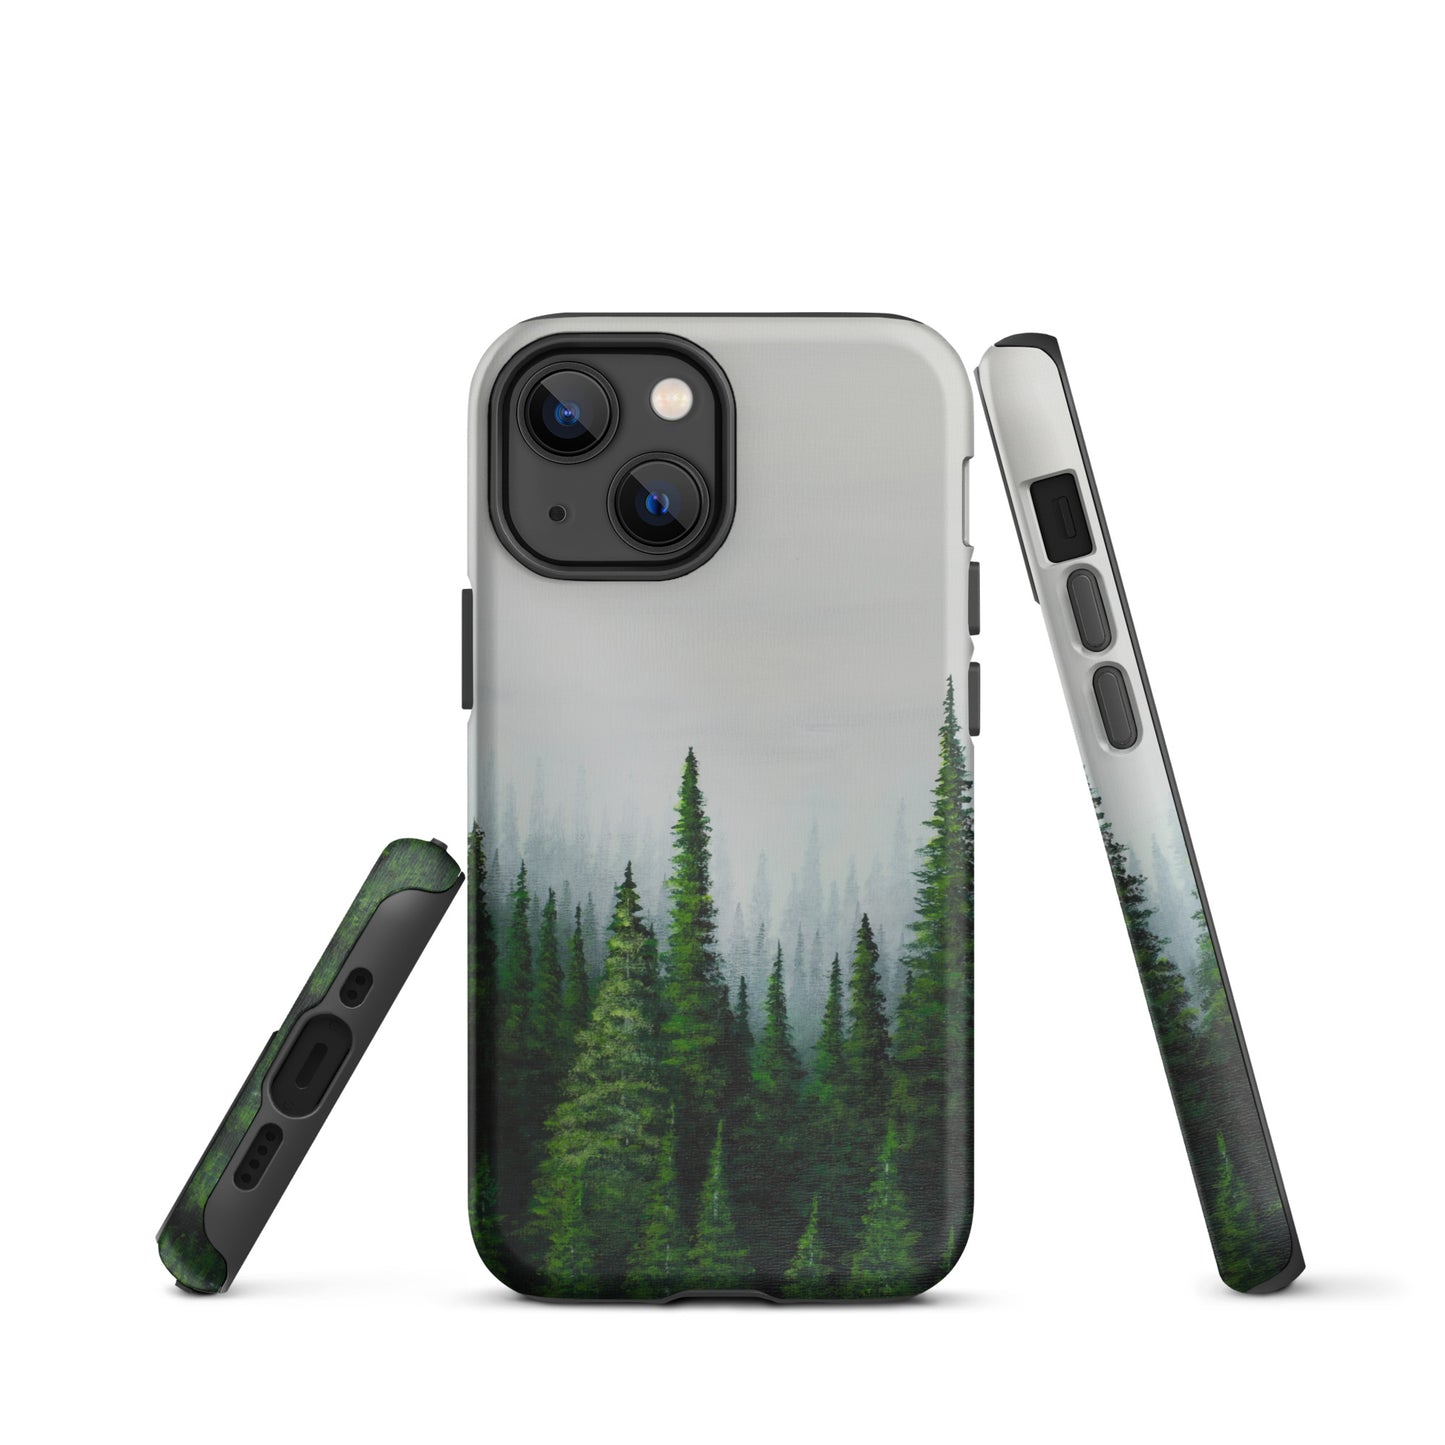 Lost in Moments Tough iPhone case